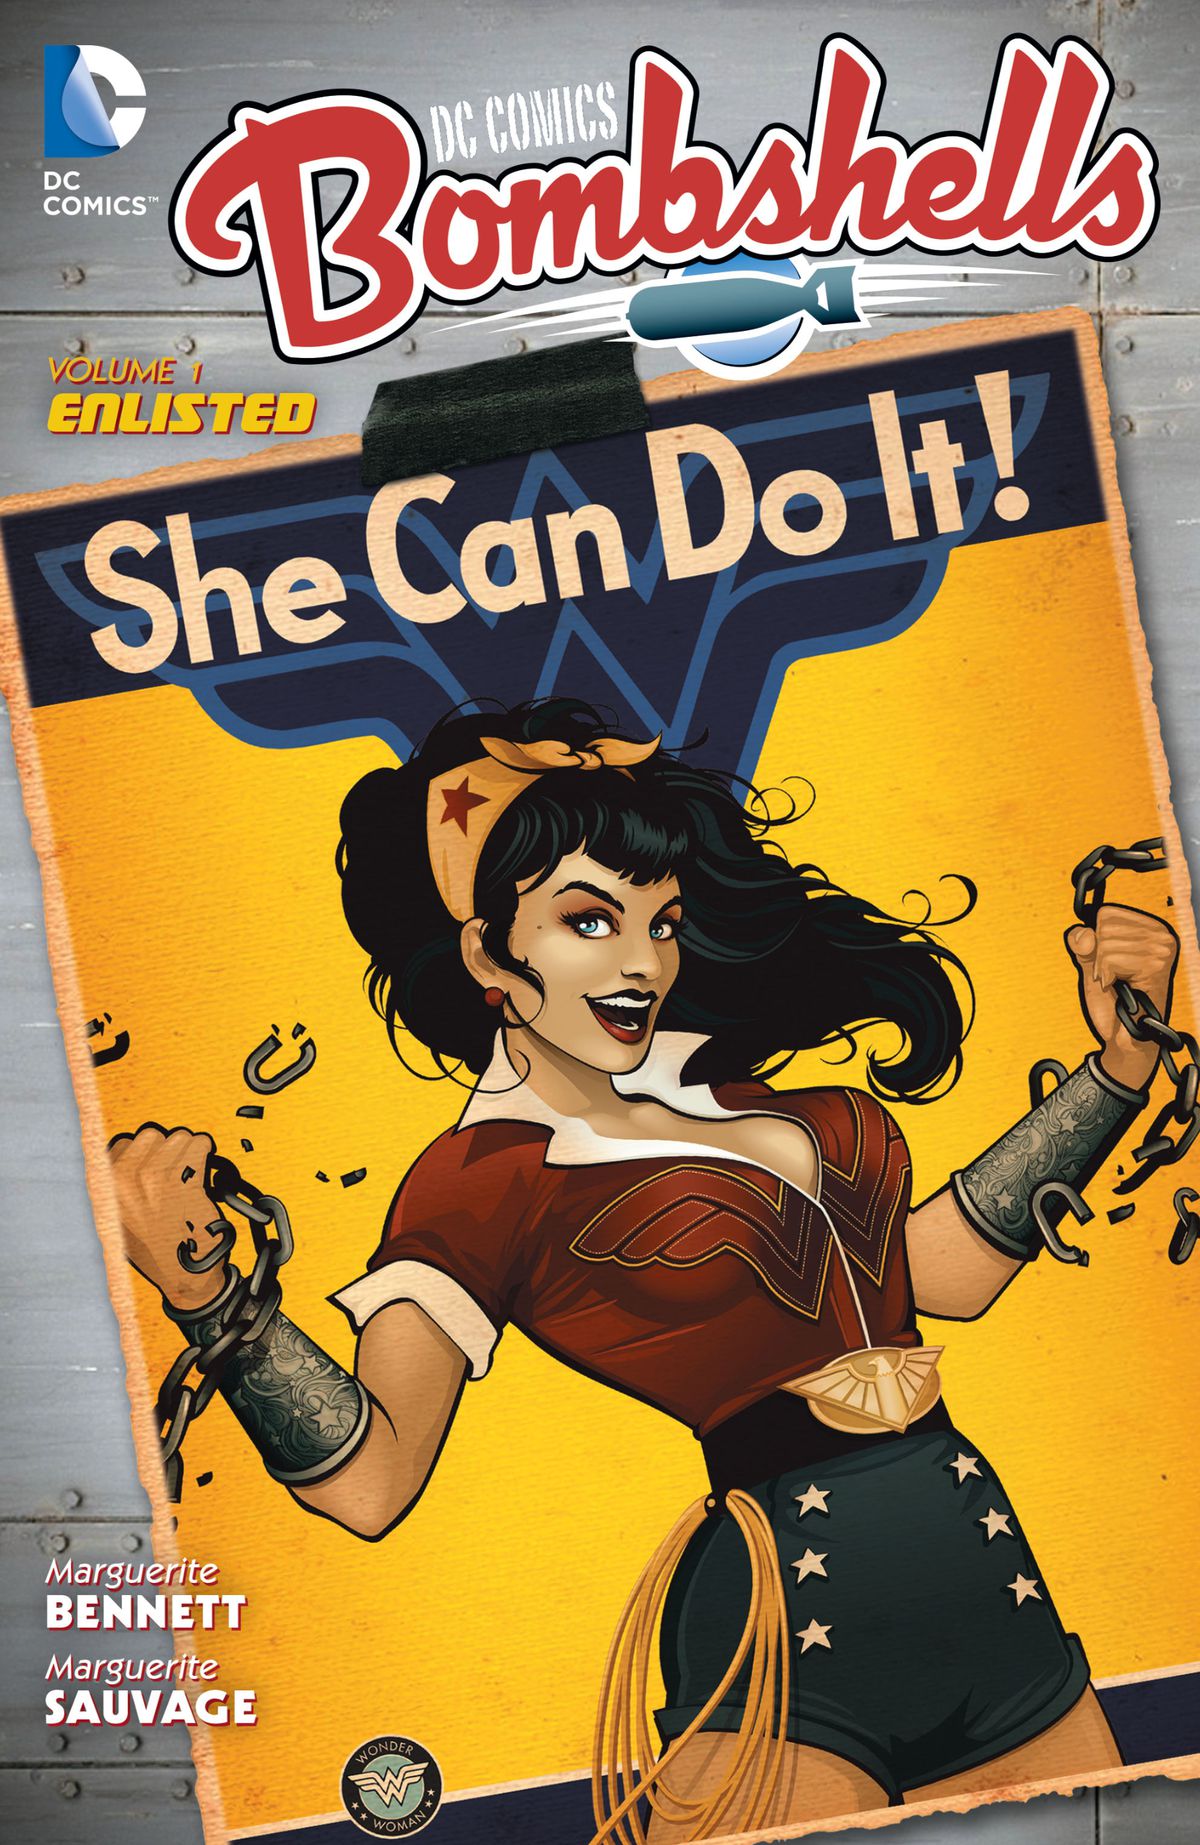 Wonder Woman bursts her chains on a poster on the cover of DC Comics Bombshells Vol 1: Enlisted. 